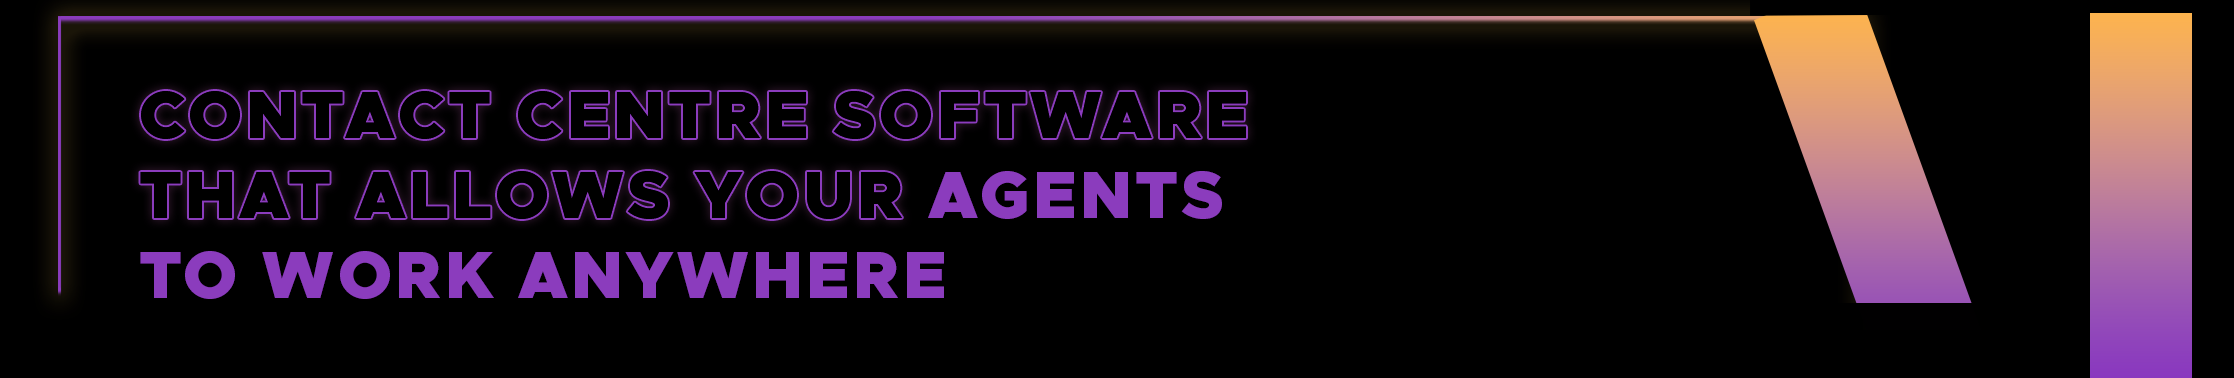 contact-centre-software-that-allow-your-agents